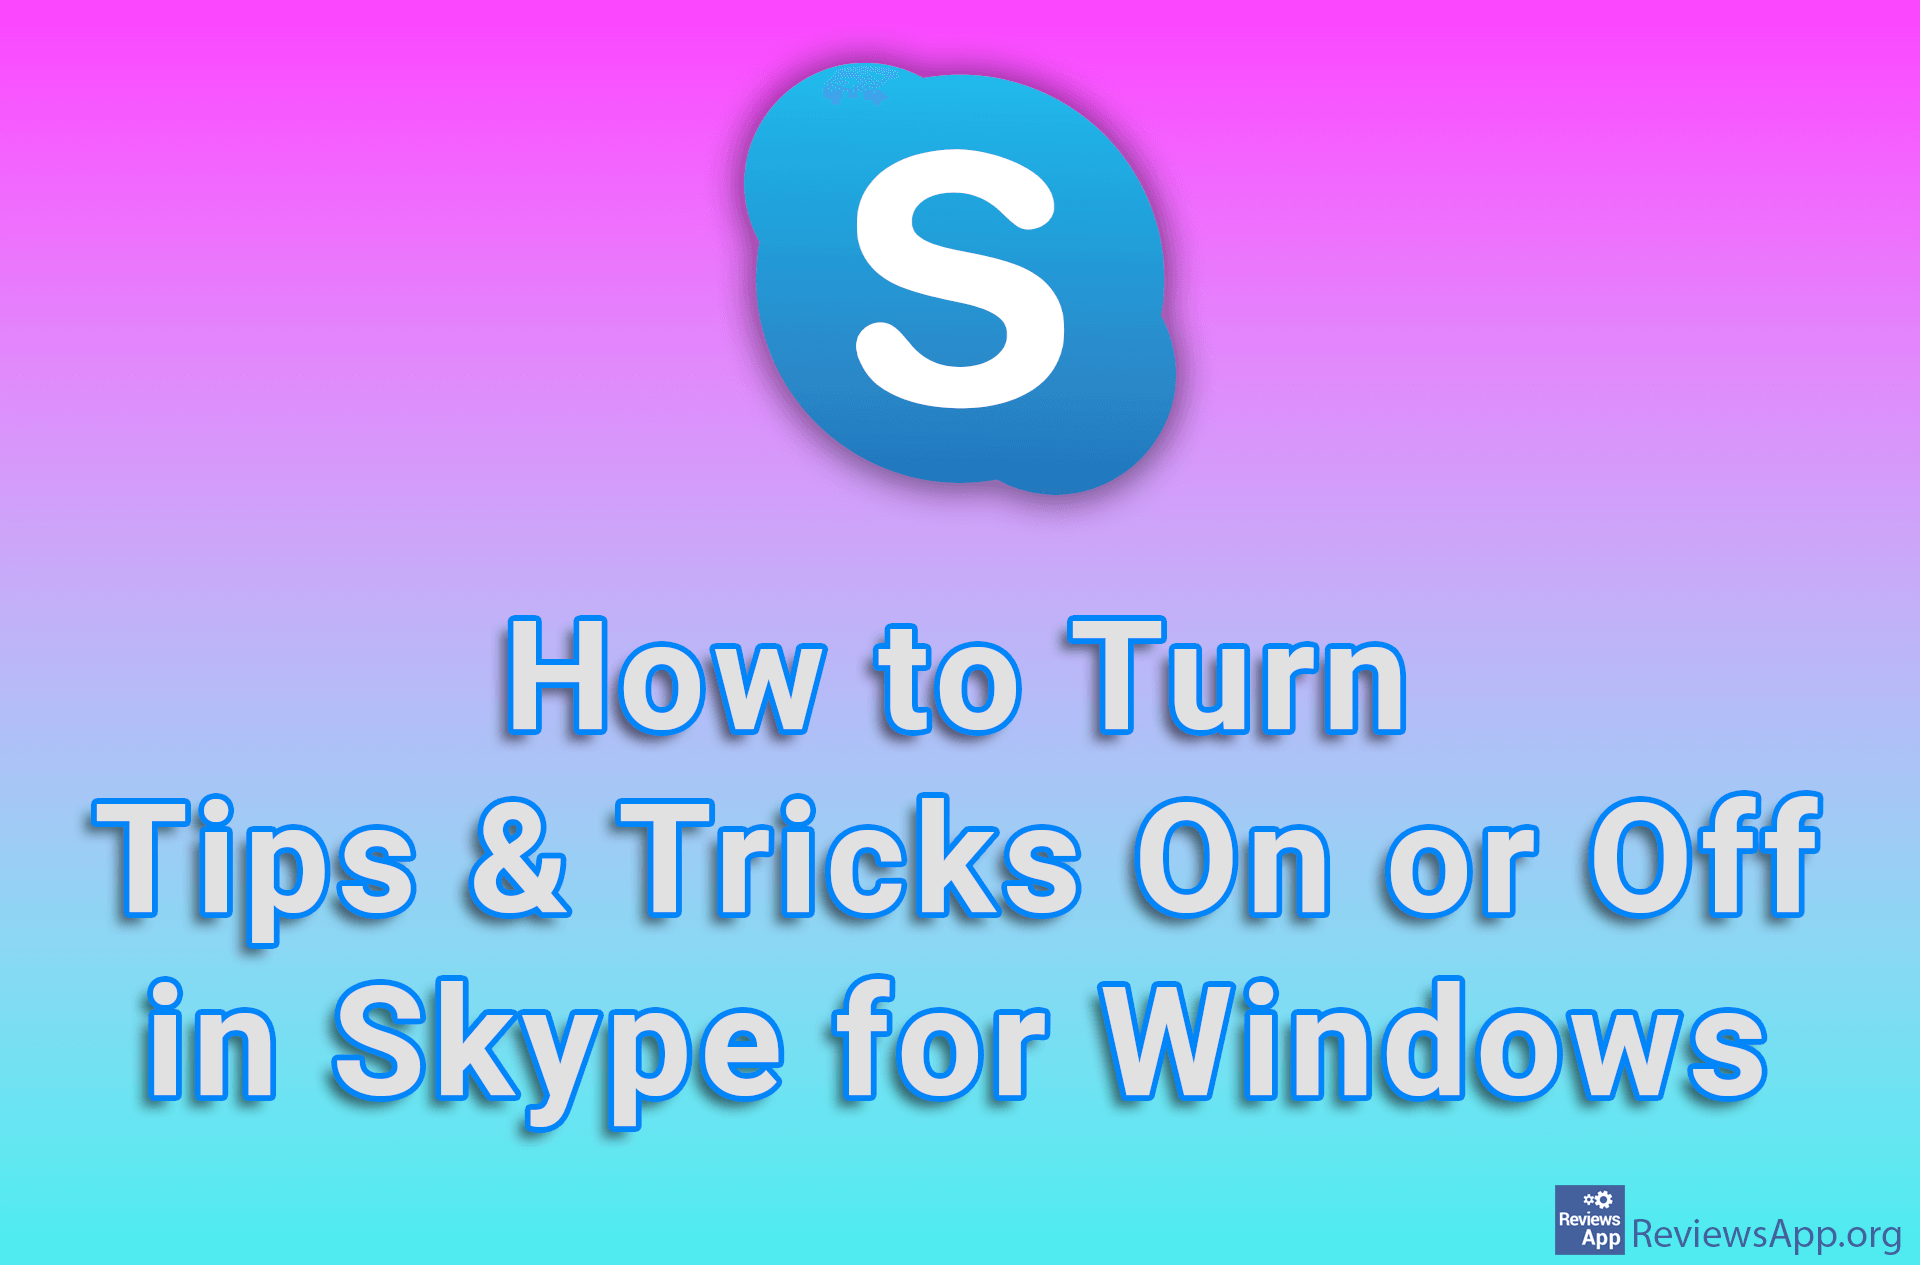 How to Turn Tips & Tricks On or Off in Skype for Windows